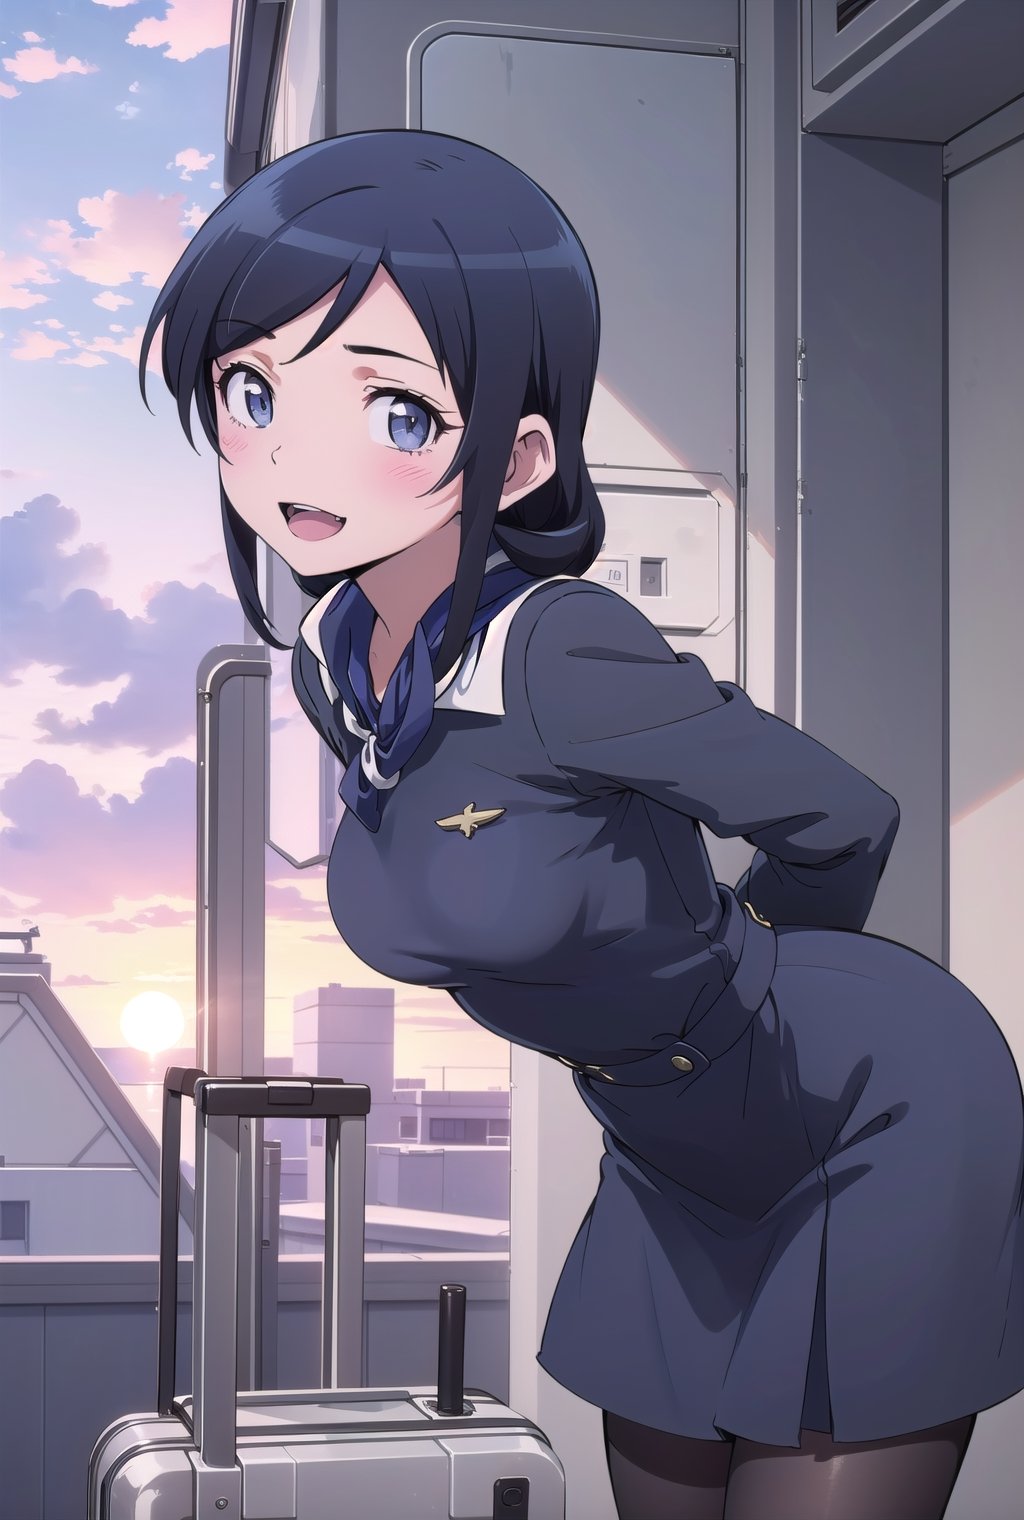 ayase aragaki,
masterpeace, best quality, highres ,girl,solo,narrow_waist, thighs,perfect face,spread_legs,perfect light,

,boichi anime style.breasts,1girl, stewardess,(1girl:1.3, solo), (cabin atendant:1.3), (stewardess:1.3), (upper body:1.3), (from side;1.3), (standing in the airplane entrance:1.3), (((starring at the viewer:1.5))), (leaning forward against the viewer:1.3), (arms behind back:1.3), BREAK, 1girl, solo, milf, European girl, hot model, (attractive model:1.37), (promotional model:1.2), highly detailed eyes and pupils, realistic skin, (attractive body, medium breast:1.25, thin waist:1.35), medium-length thin hair, (chignon hair:1.3, chignon hair net:1.3), mahogany hair, extremely detailed hair, delicate sexy face, sensual gaze, shiny lips, BREAK, (cabin atendant uniforms:1.3), (stewardess dark-blue uniform:1.3), (white formal collared blouse:1.3), (navy formal knee-length-tight-skirt:1.3), (elegant blue scarf:1.3), (pin-heels:1.3), (black stocking:1.3), detailed clothes, BREAK, (in the airplane, blurry background:1.25, simple background, no-human background, detailed background), (under sunset:1.37), BREAK, (attractive posing), ((realistic, super realistic, realism, realistic detail)), perfect anatomy, perfect proportion, bokeh, depth of field, hyper sharp image, (attractive emotion, seductive smile:1.2, happy:1.2, blush:1.2, :d:1.2, :p:1.2), 4fingers and thumb, perfect human hands, wind, BREAK, (Masterpiece, best quality, photorealistic, highres, photography, :1.3), ultra-detailed, sharp focus, professional photo, commercial photo, ,Stewardess,1 girl
, (attractive posing),perfect anatomy, perfect proportion, bokeh, depth of field, hyper sharp image, (attractive emotion, seductive smile:1.2,cabin atendant:1.3), (stewardess:1.3), (upper body:1.3),sensual gaze,boichi anime style